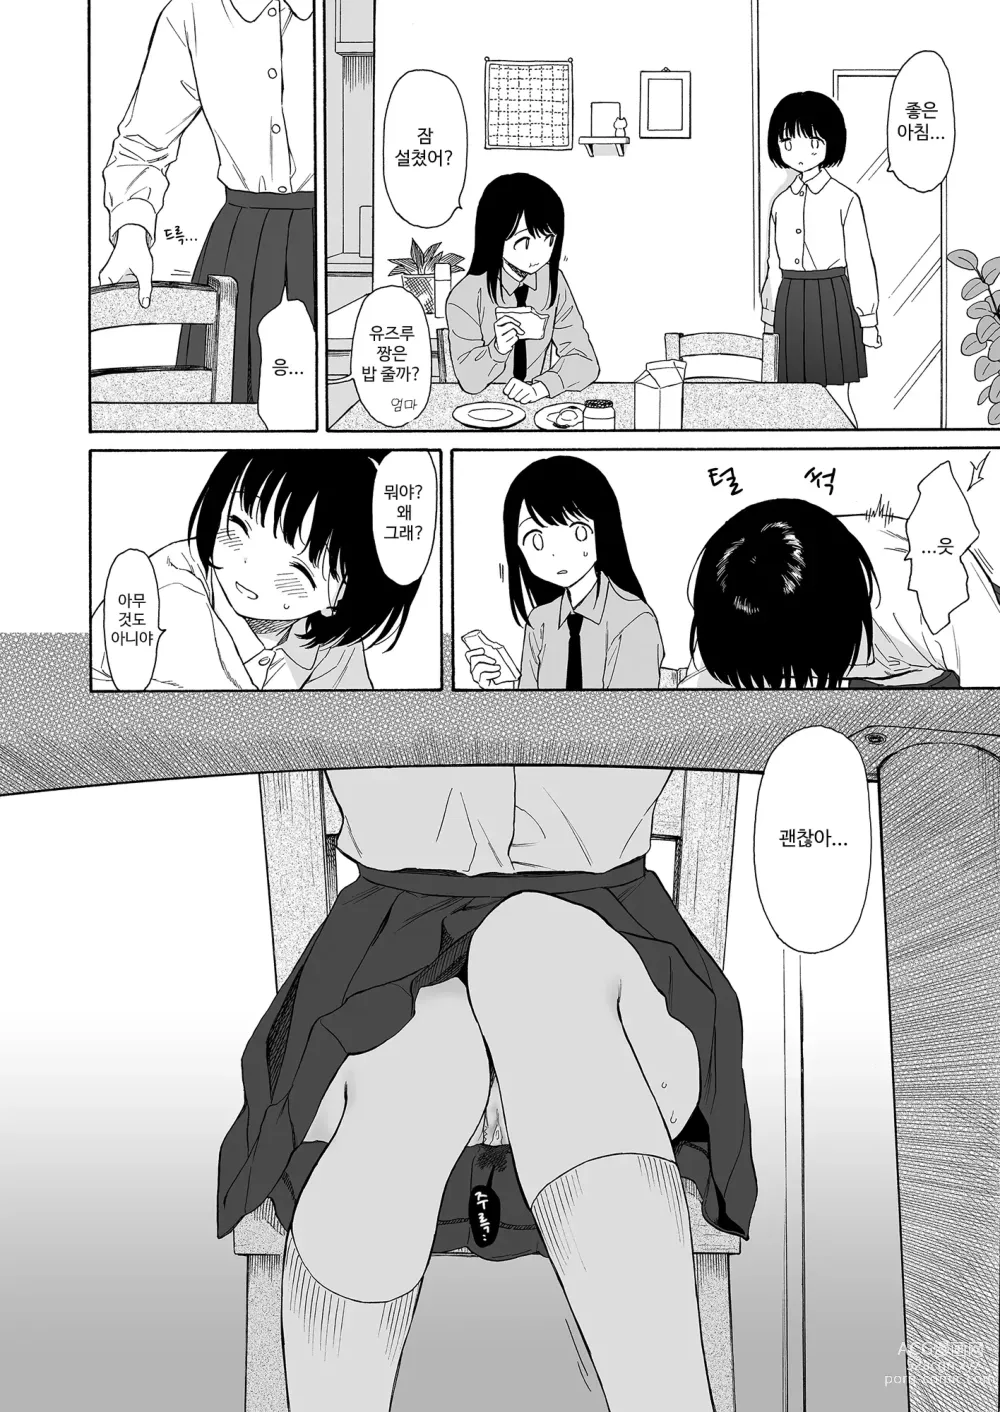 Page 26 of doujinshi 심야의 침입자